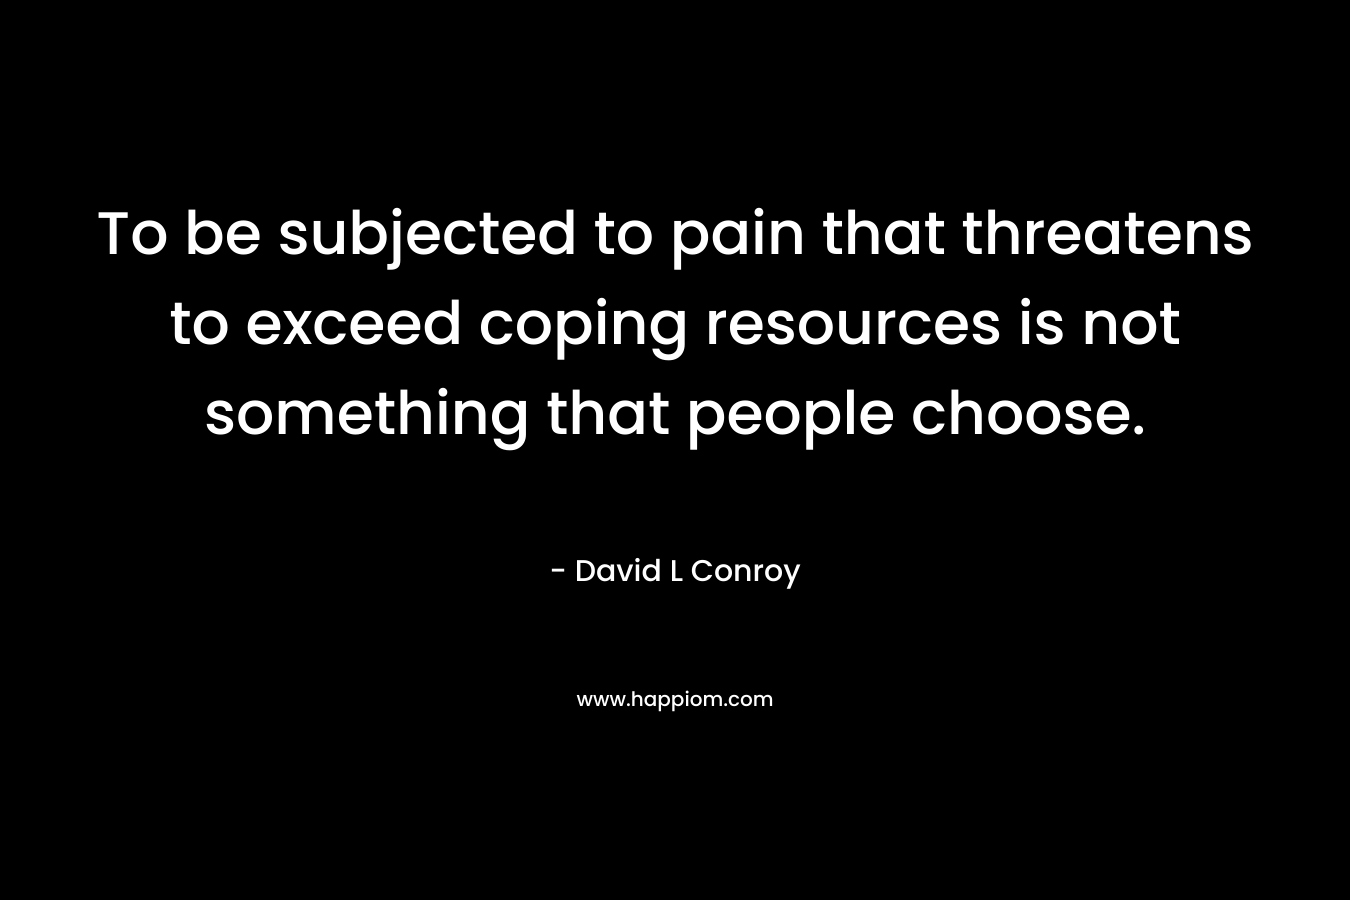 To be subjected to pain that threatens to exceed coping resources is not something that people choose.